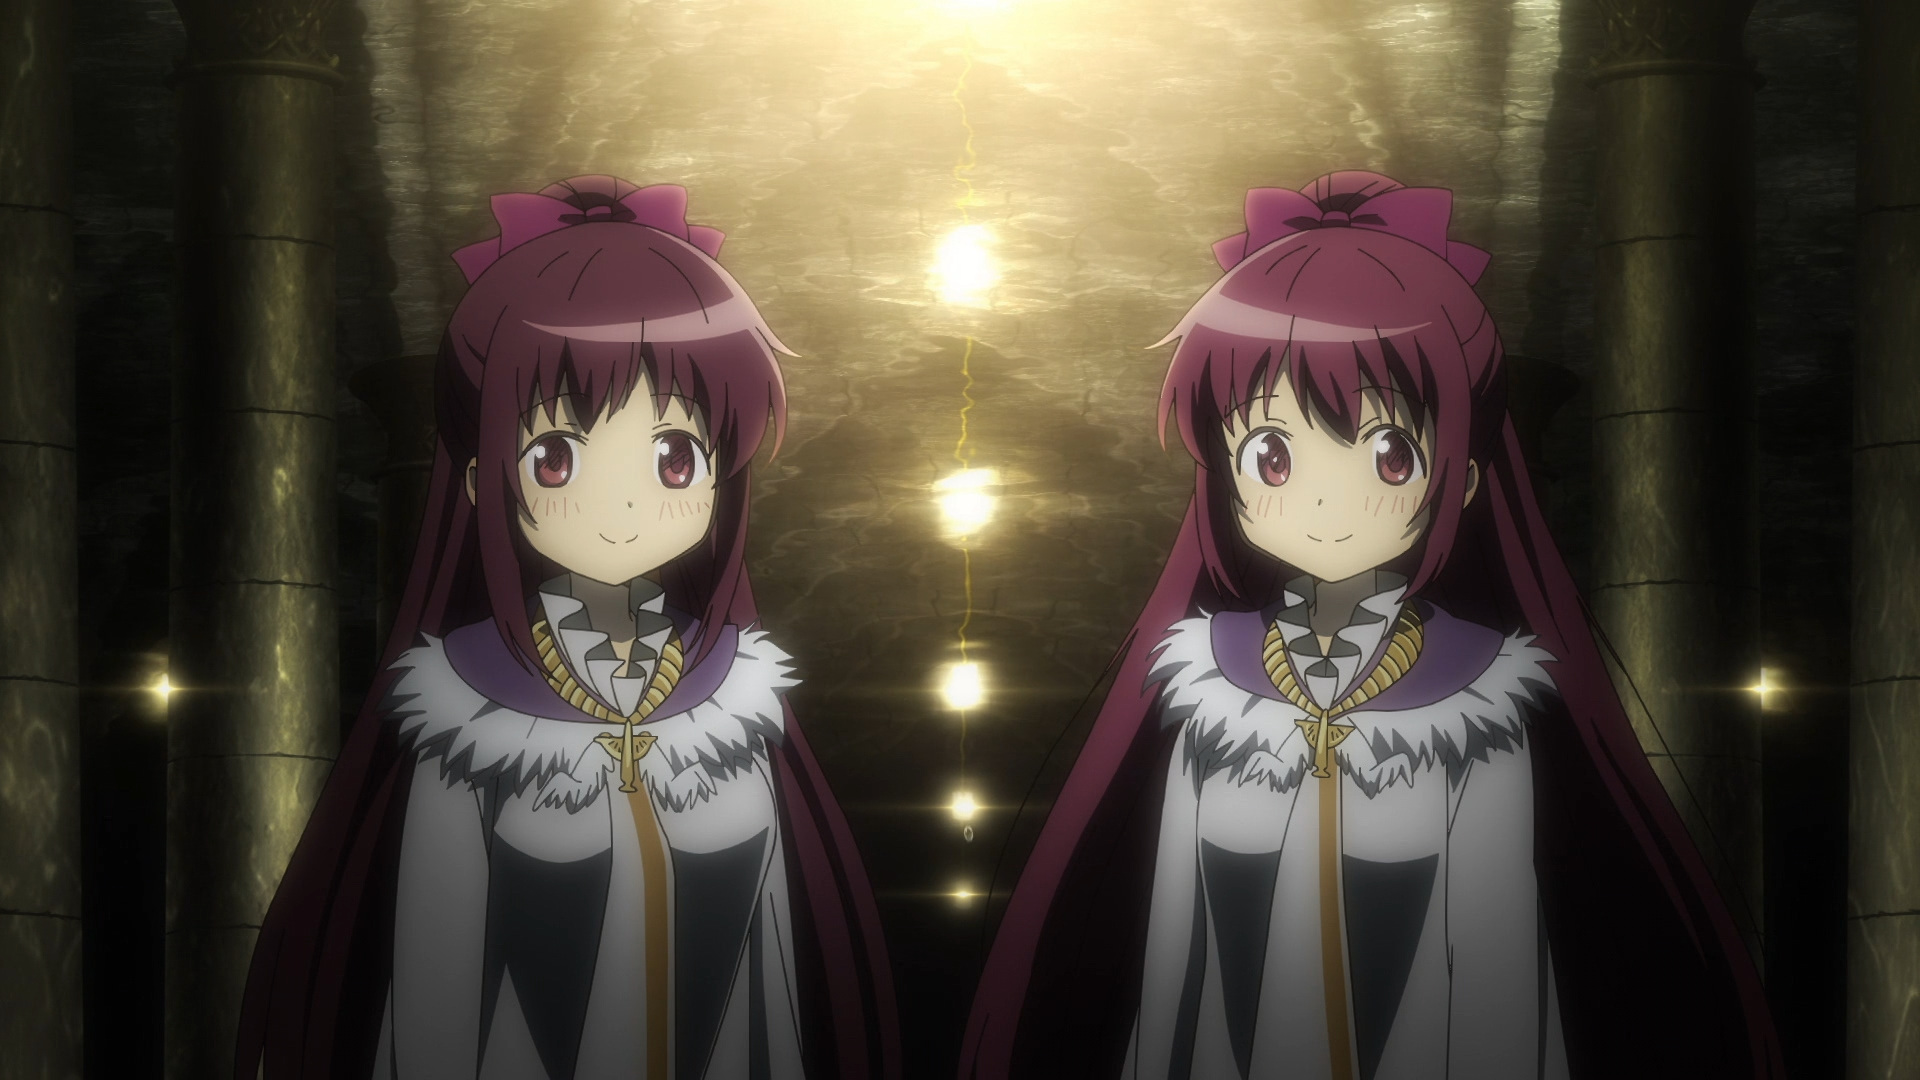 During this episode, Iroha’s Soul Gem once more became murky and summoned a...